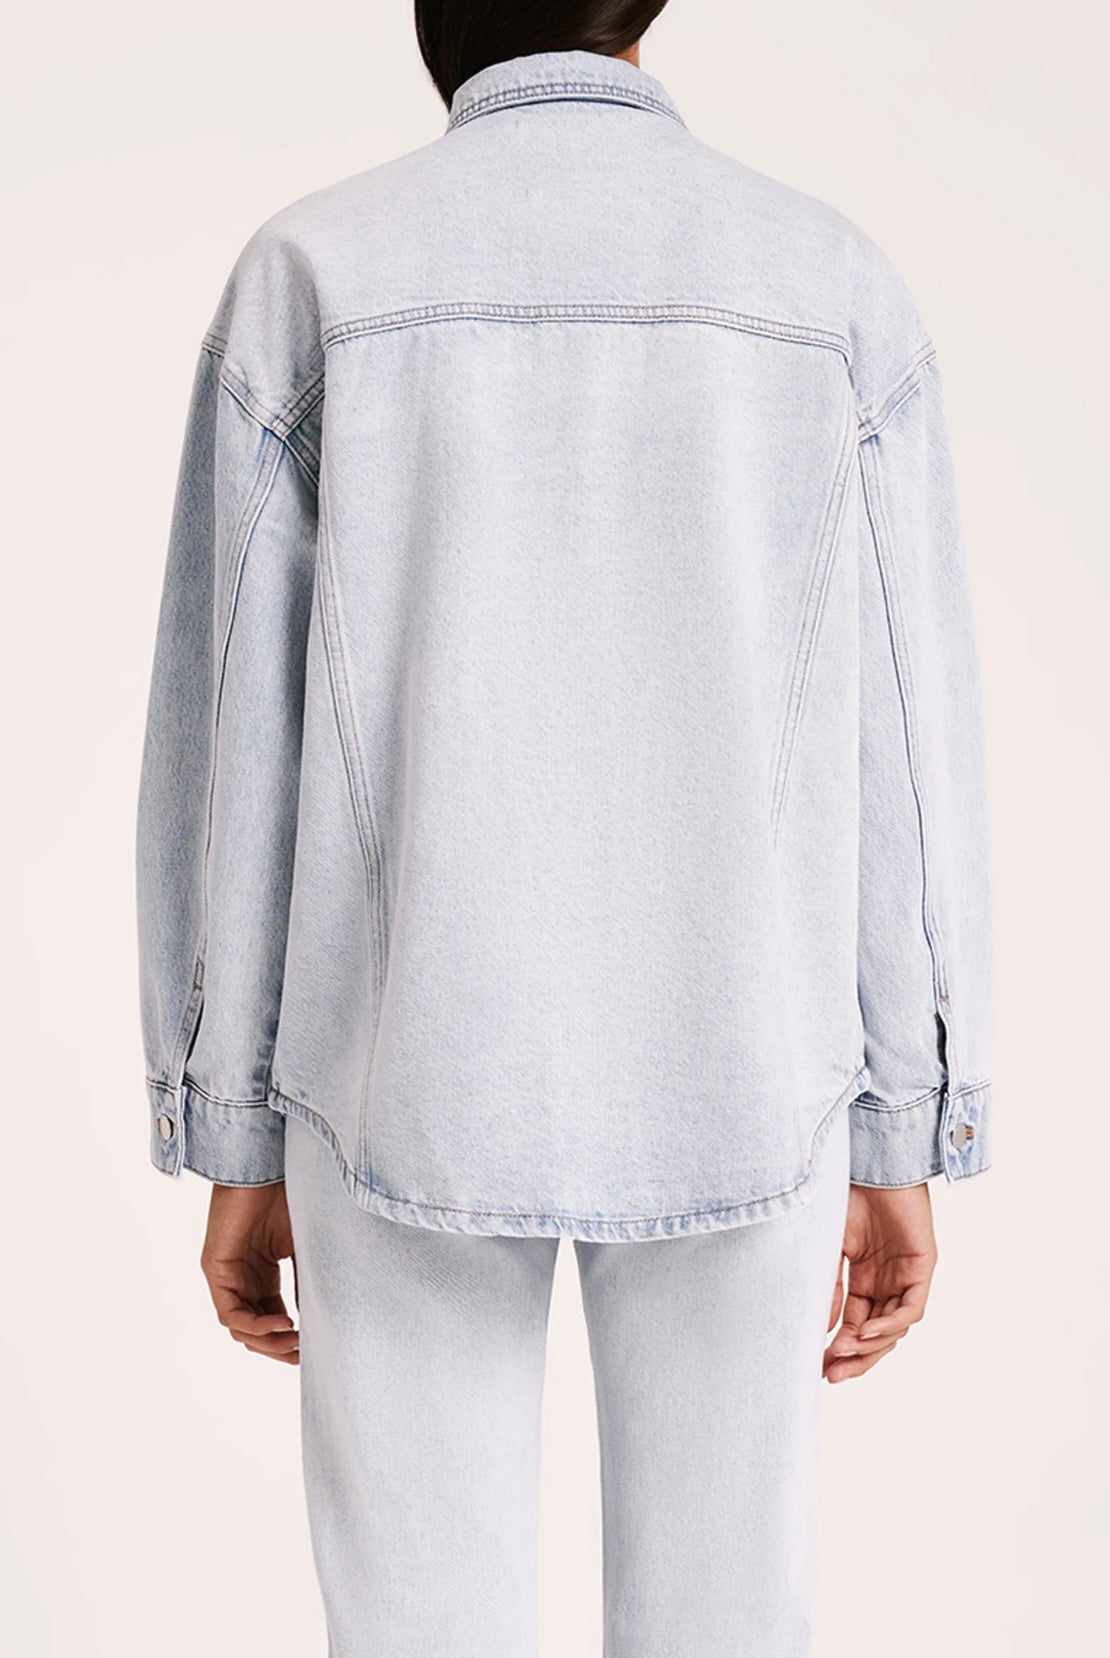 Nude Lucy Organic Denim Jacket in Clear Blue